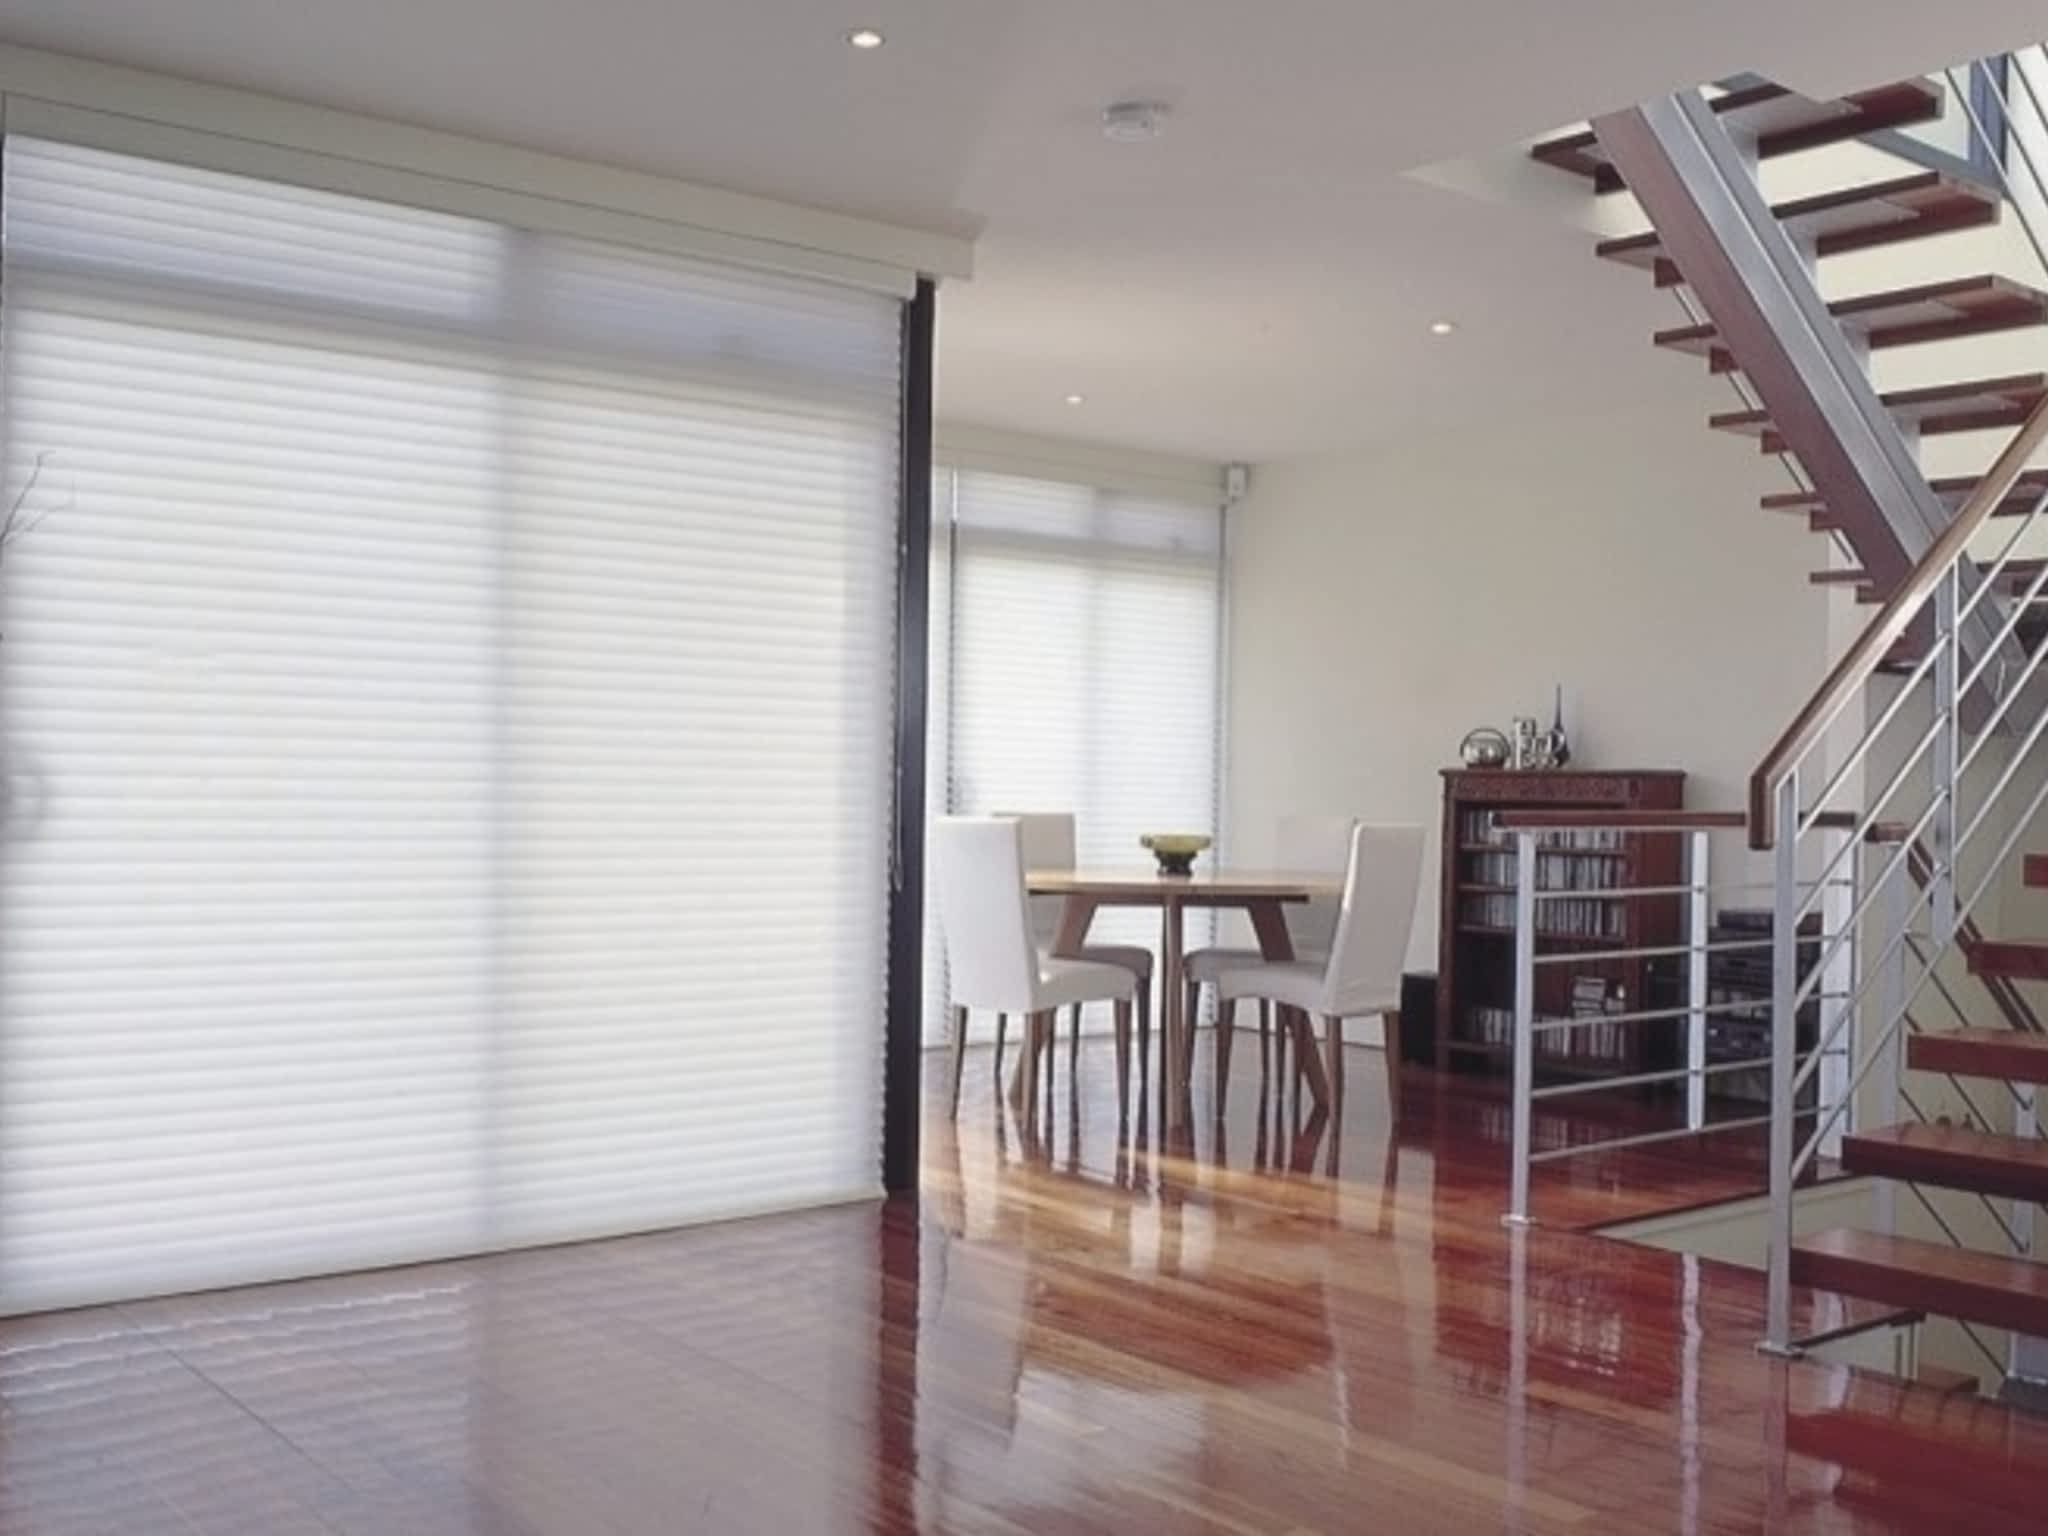 photo DBS Blinds & Home Decor Services